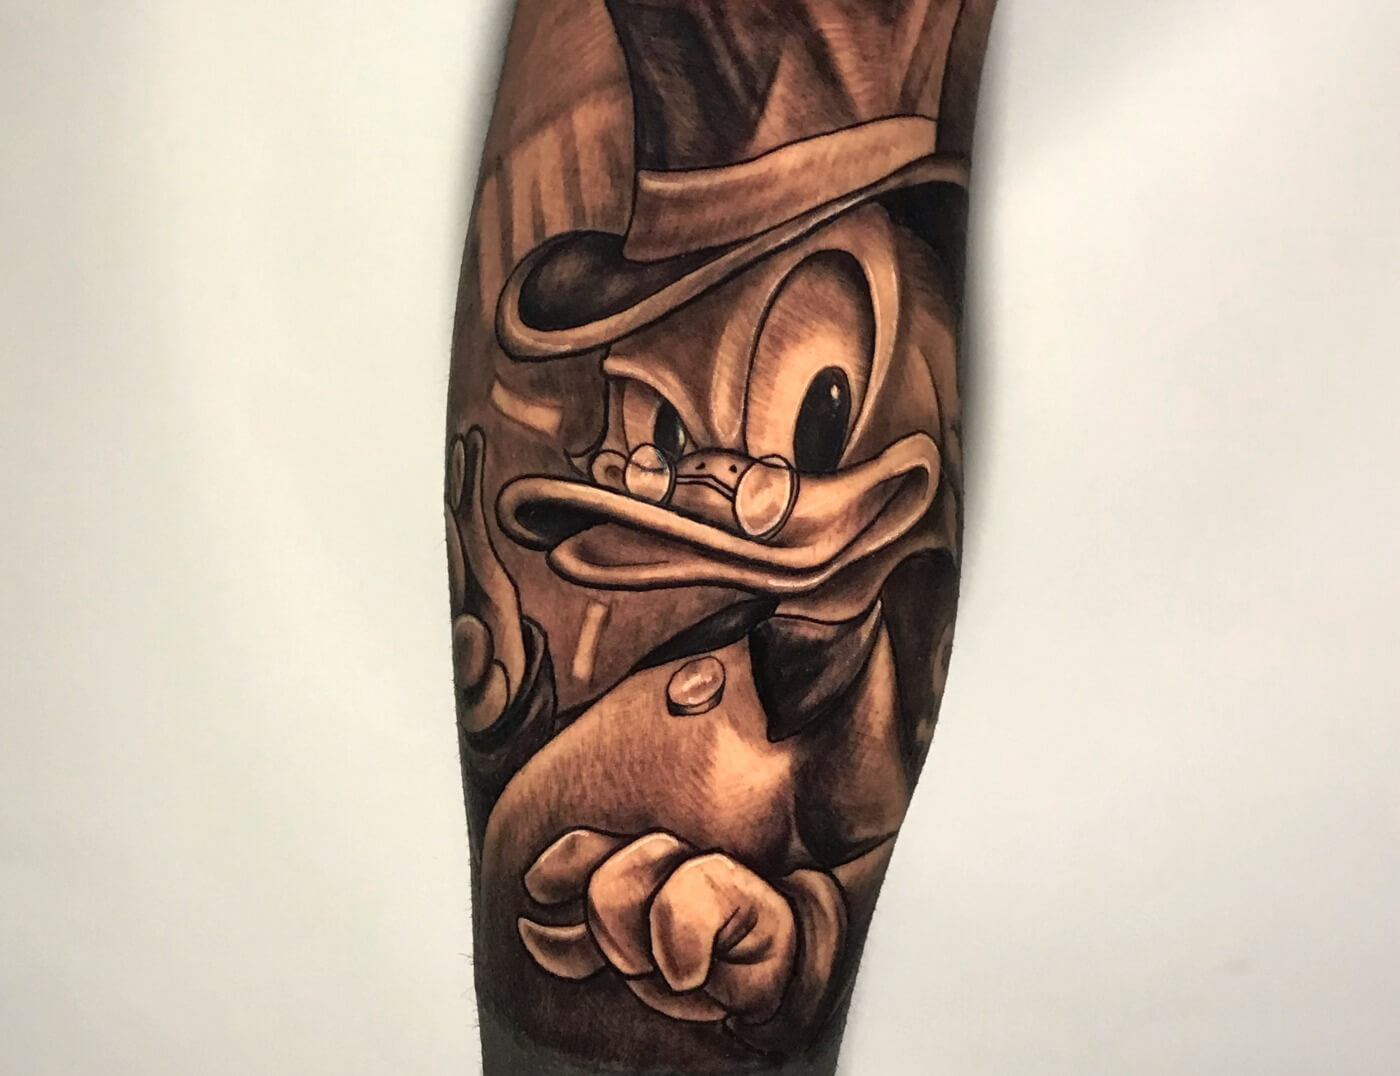 Scrooge McDuck" Black And Grey Tattoo By Rene Cristobal - Iron Palm Tattoos & Body Piercing